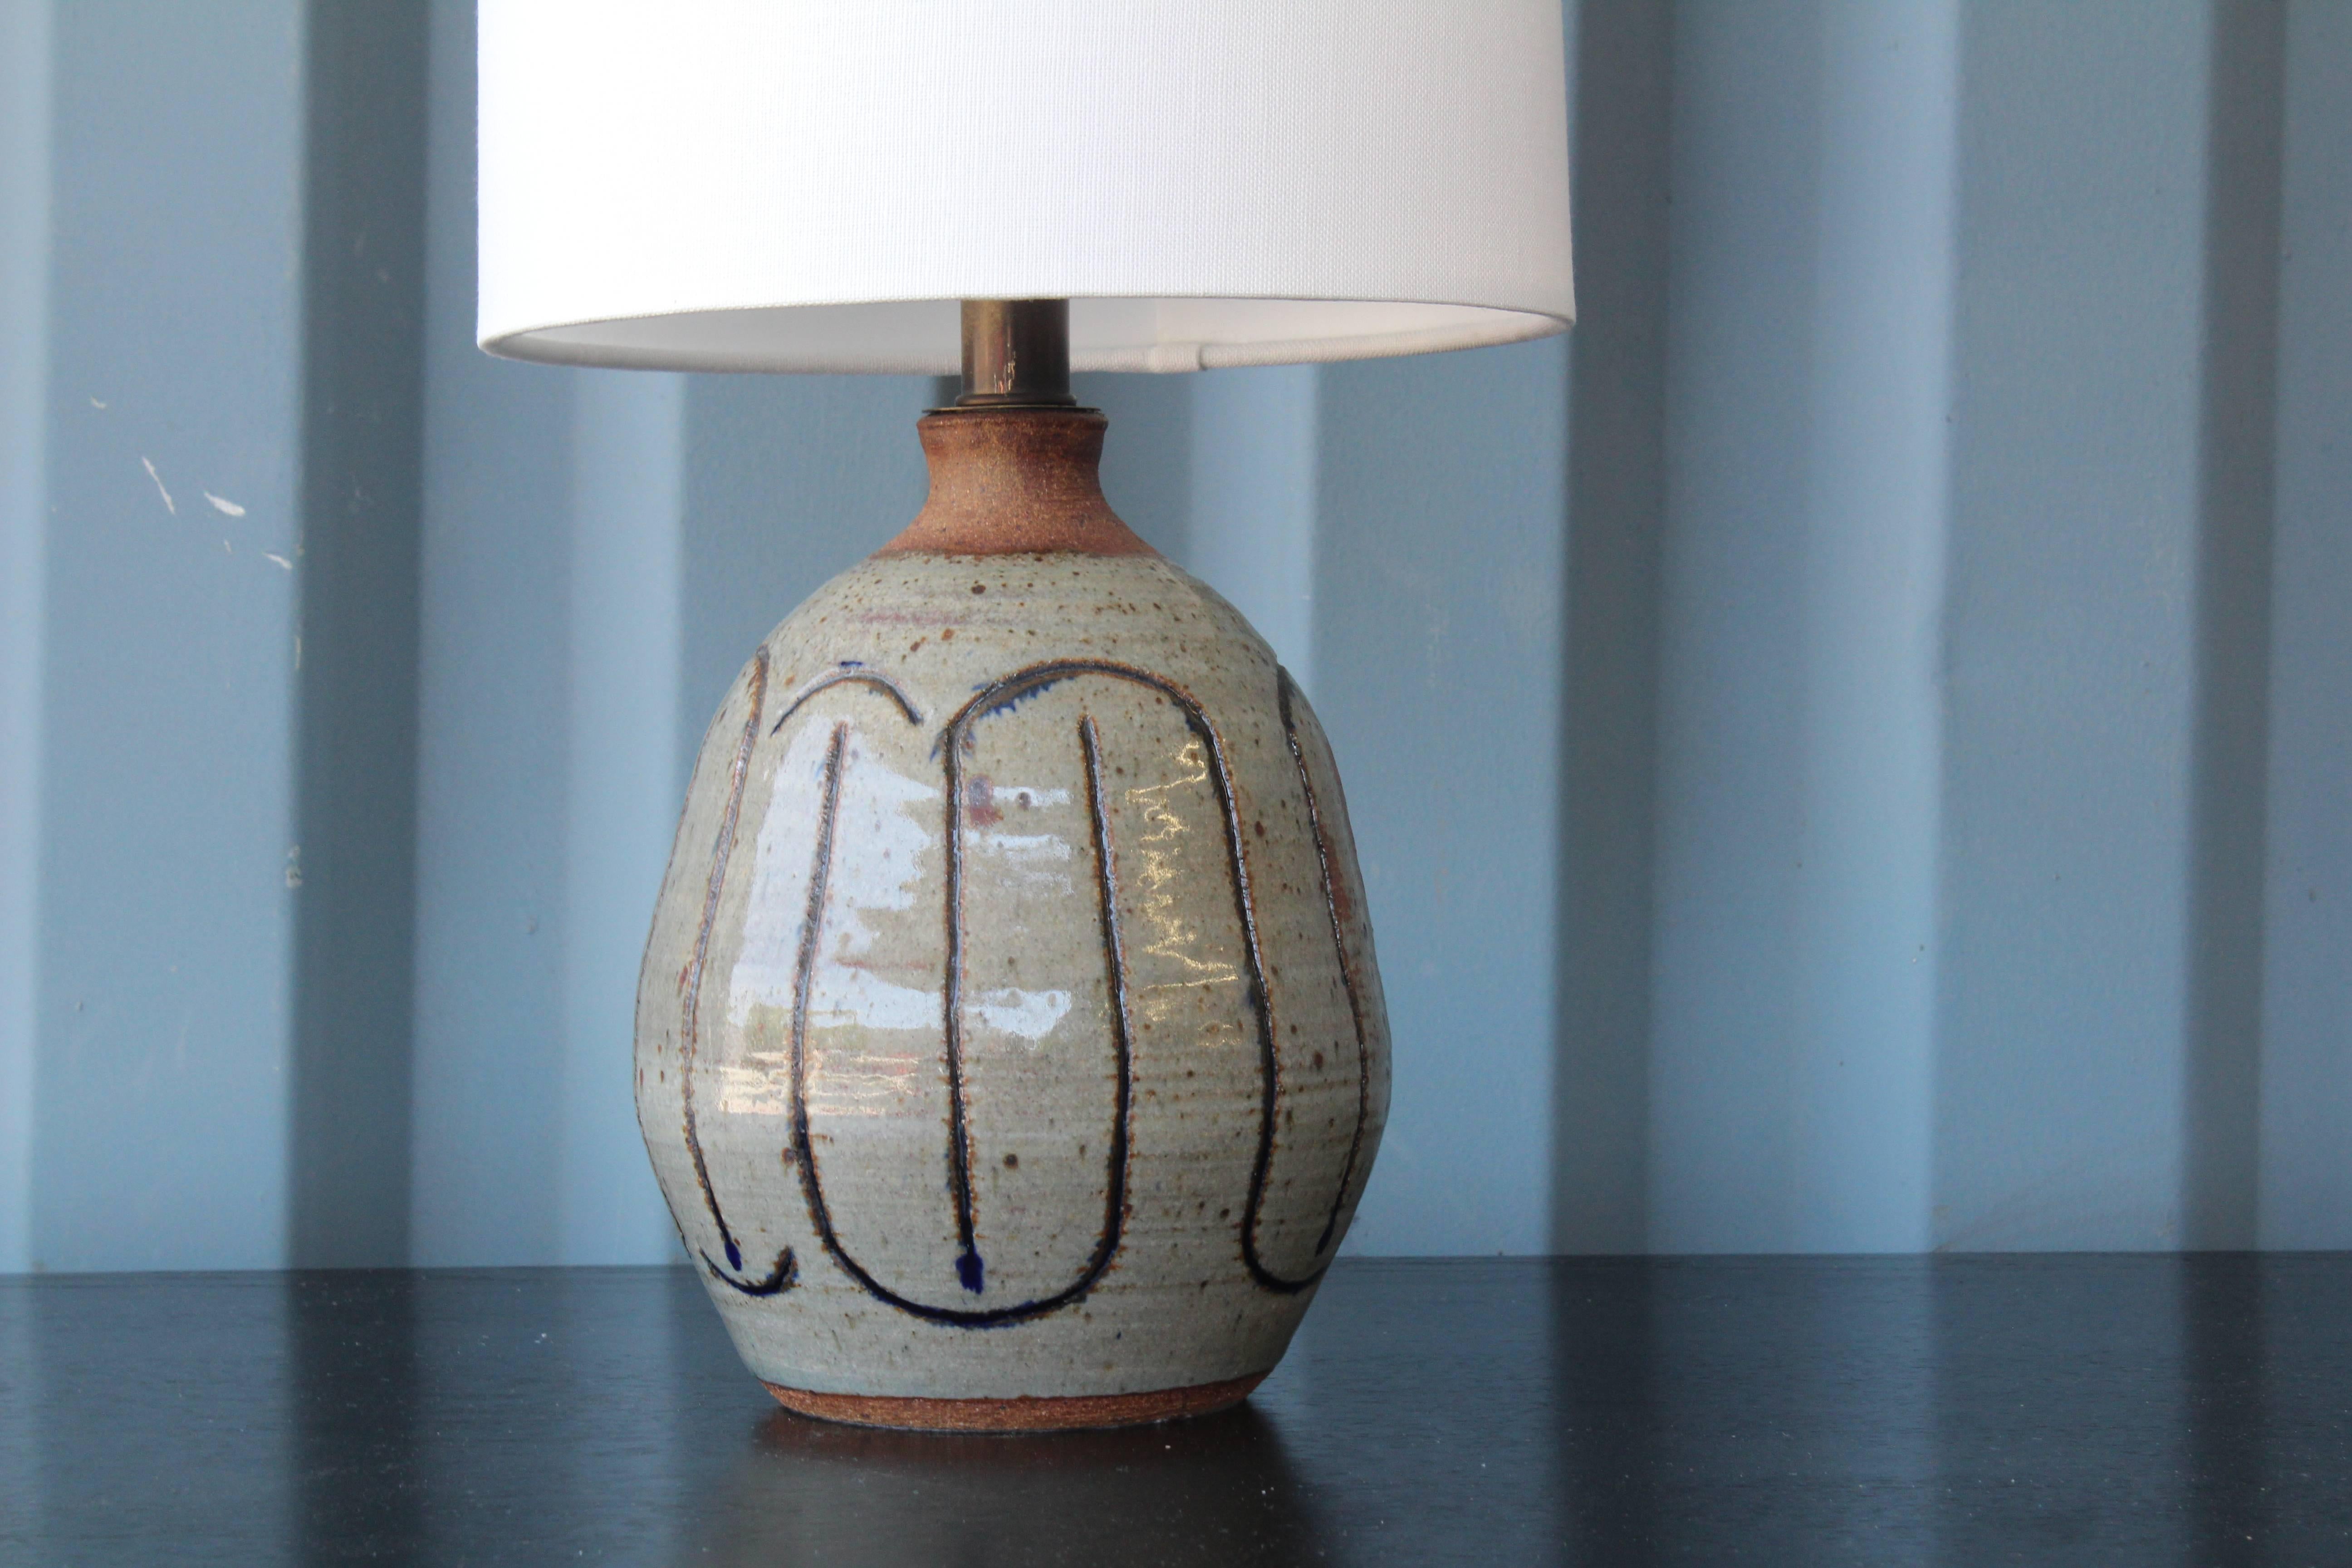 1960s ceramic glazed lamp. Recently rewired and includes a custom-made shade in white linen.